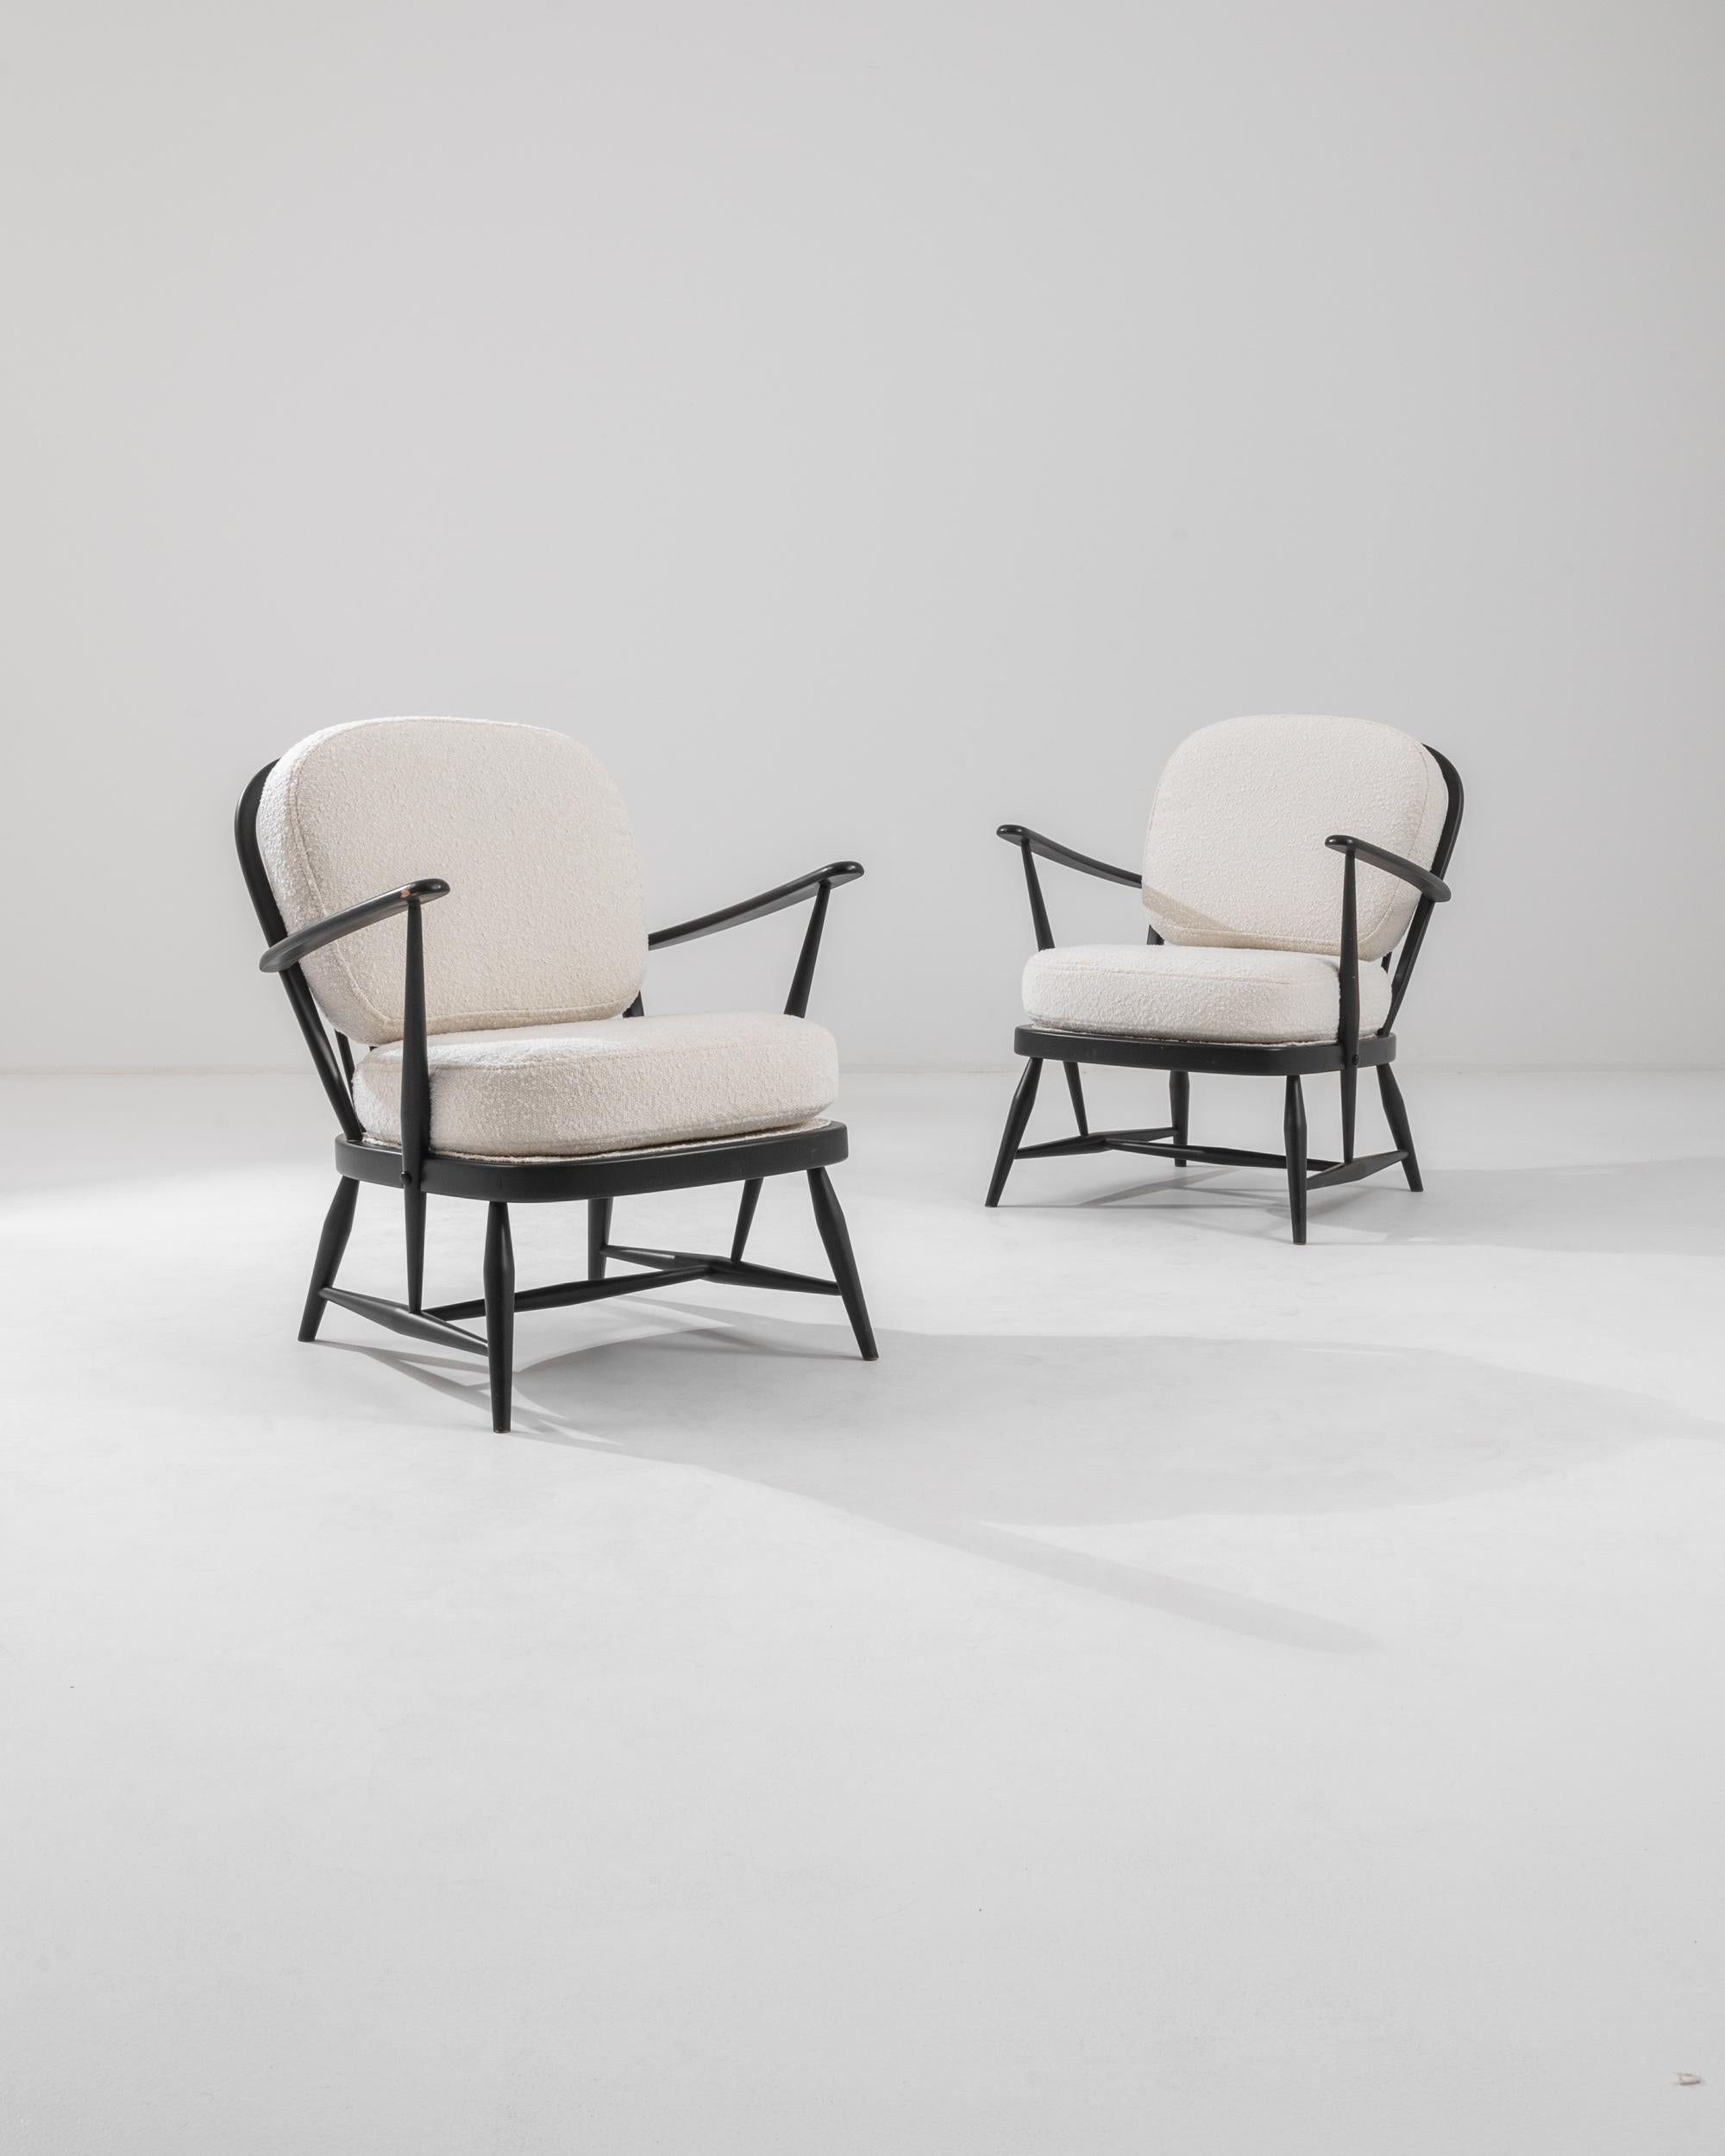 This stylish pair of vintage armchairs combine homey farmhouse elements with a bold Modernist approach. Made in the United Kingdom in the 20th century, slender spindles, typical of traditional Windsor chairs, are arranged into a novel silhouette.